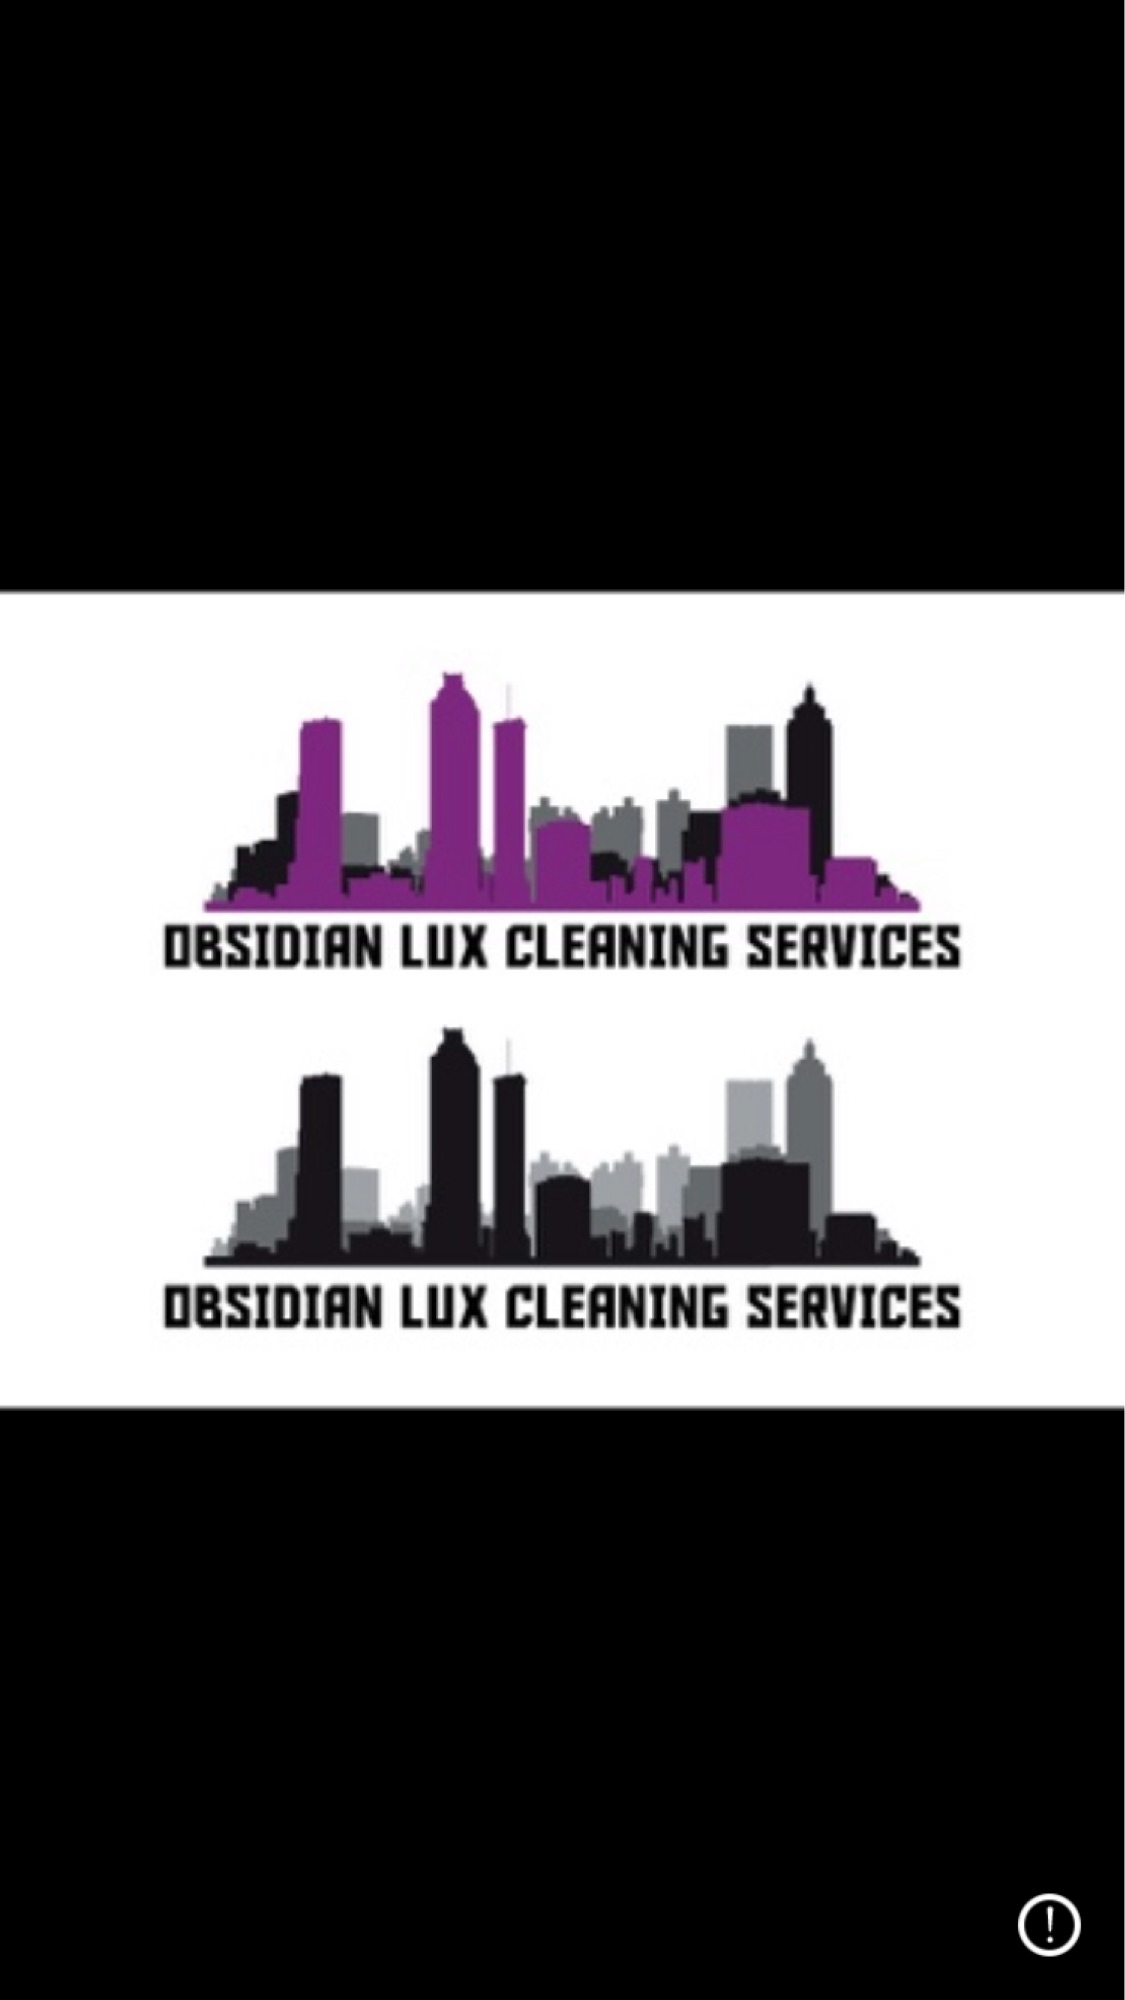 Obsidian Lux Cleaning Services Logo